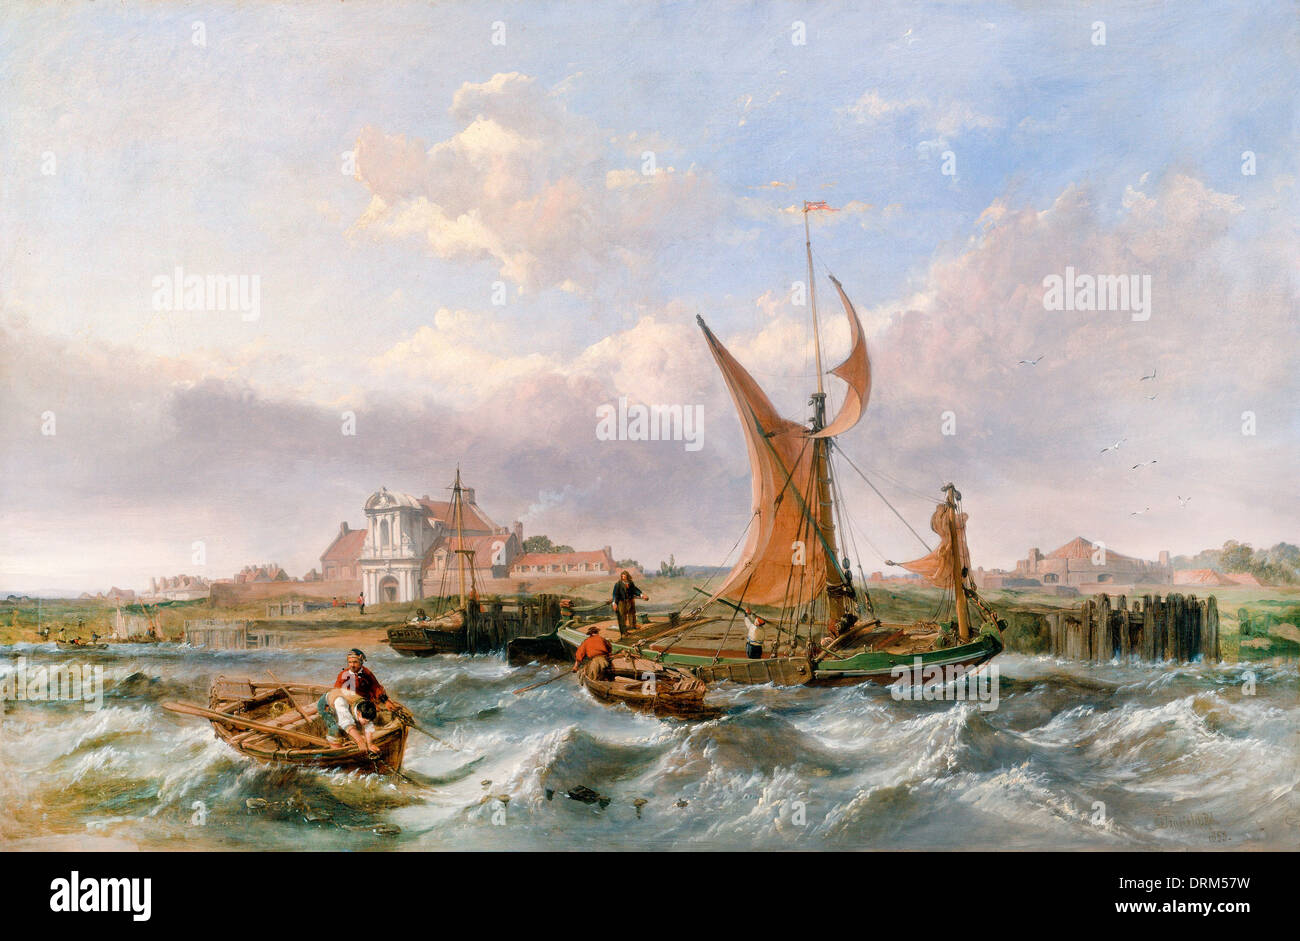 Clarkson Frederick Stanfield, Tilbury Fort--Wind Against the Tide 1853 Oil on canvas. Yale Center for British Art, New Haven, US Stock Photo